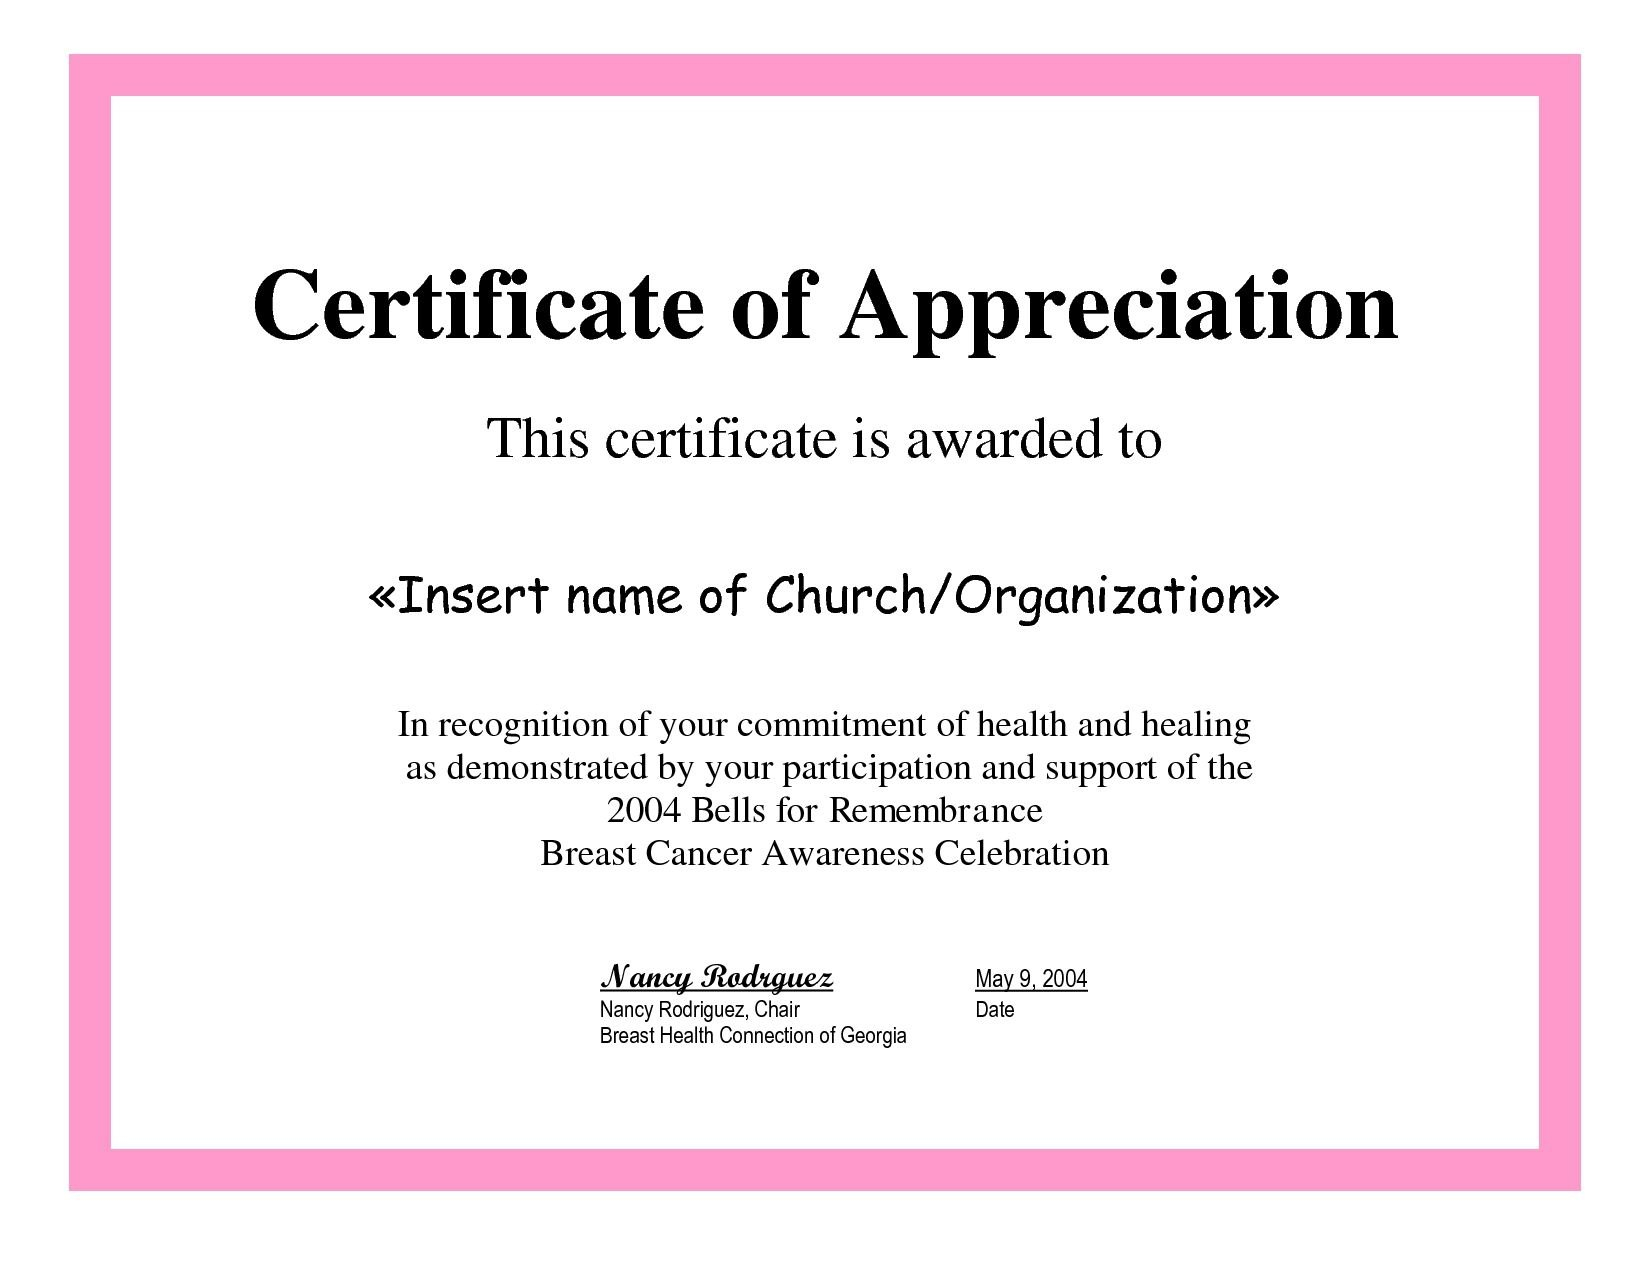 Employee Appreciation Certificate Template Free Recognition with regard to Best Employee Award Certificate Templates